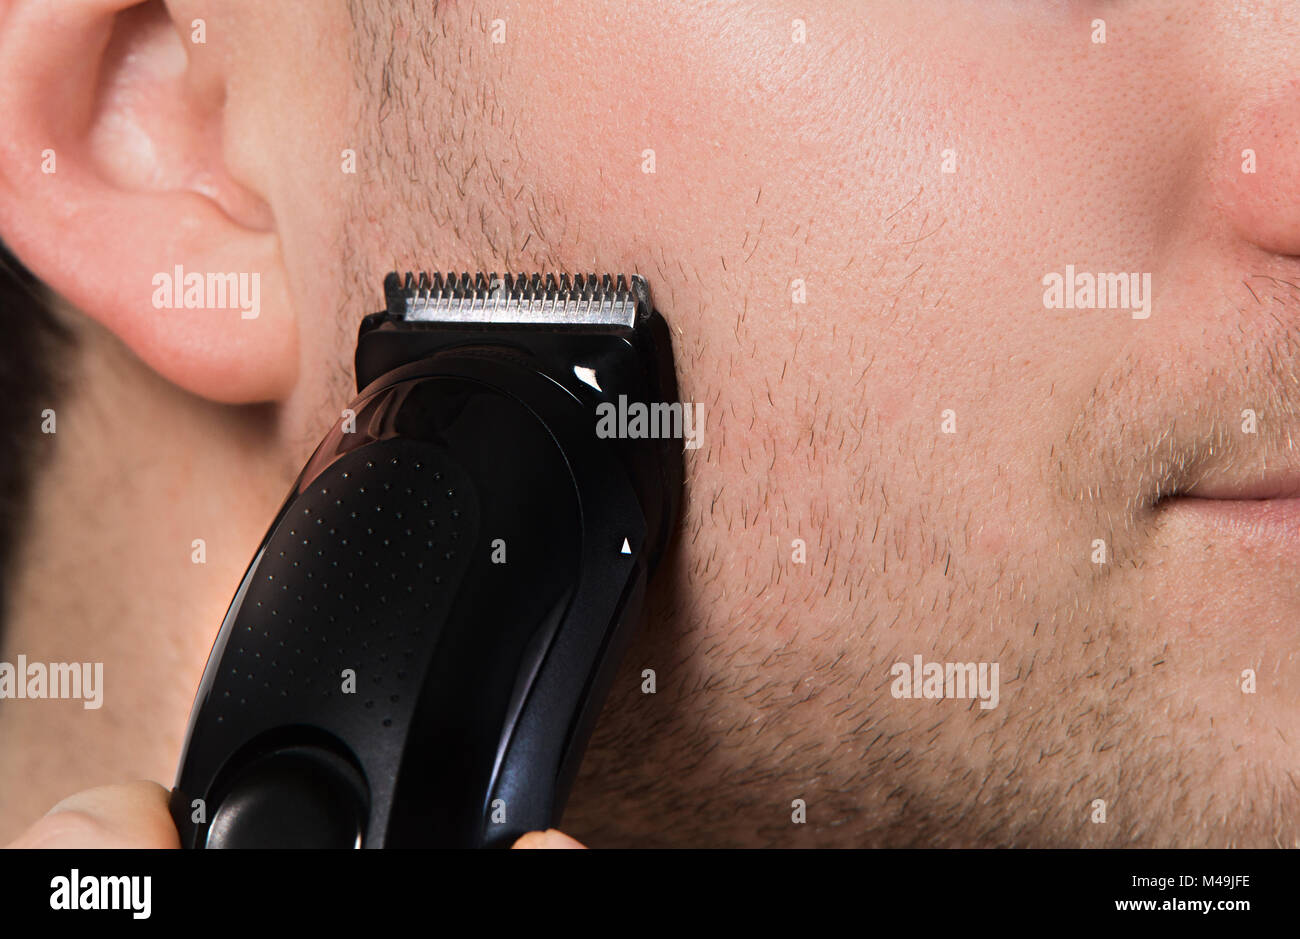 Trimmer on unshaven face closeup. Man shaving with electric shaver. Stock Photo